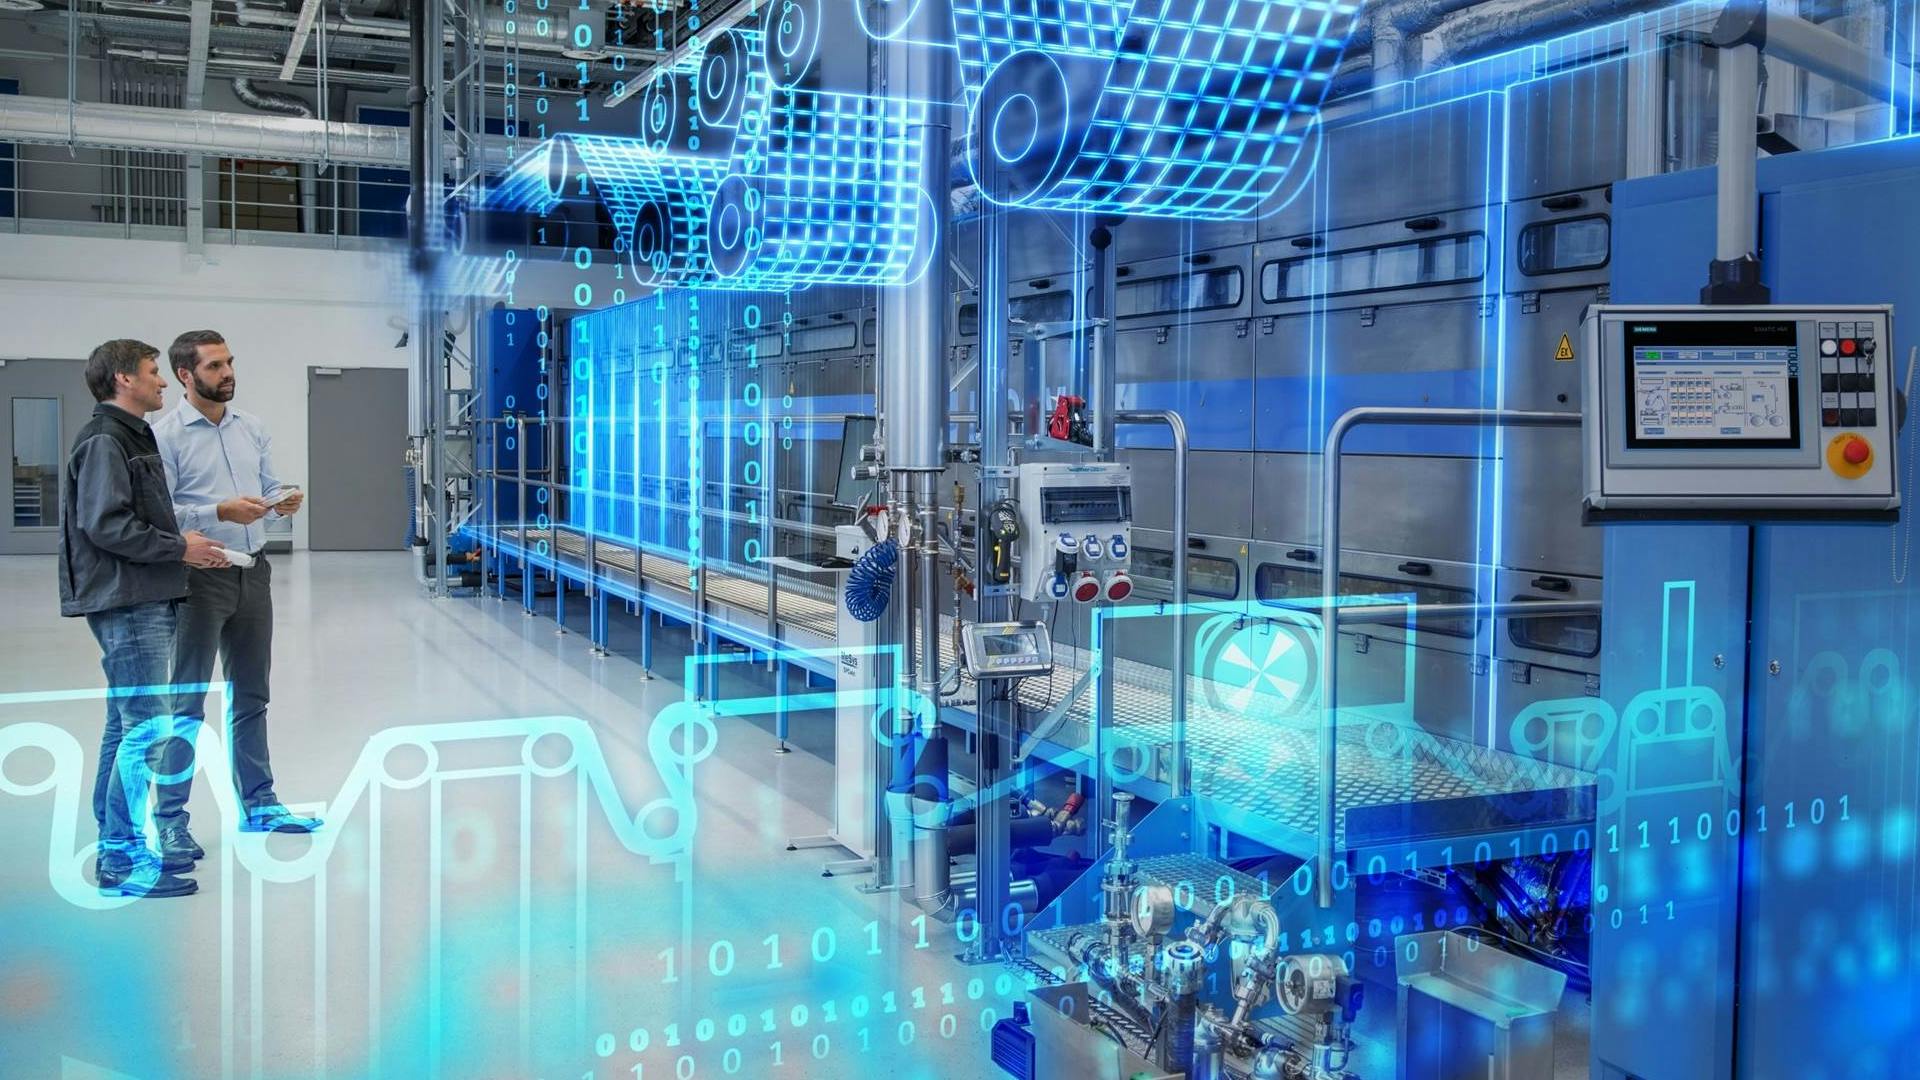 Advanced Machine Engineering – helping industrial machinery manufacturers achieve their digitalization goals and key business challenges